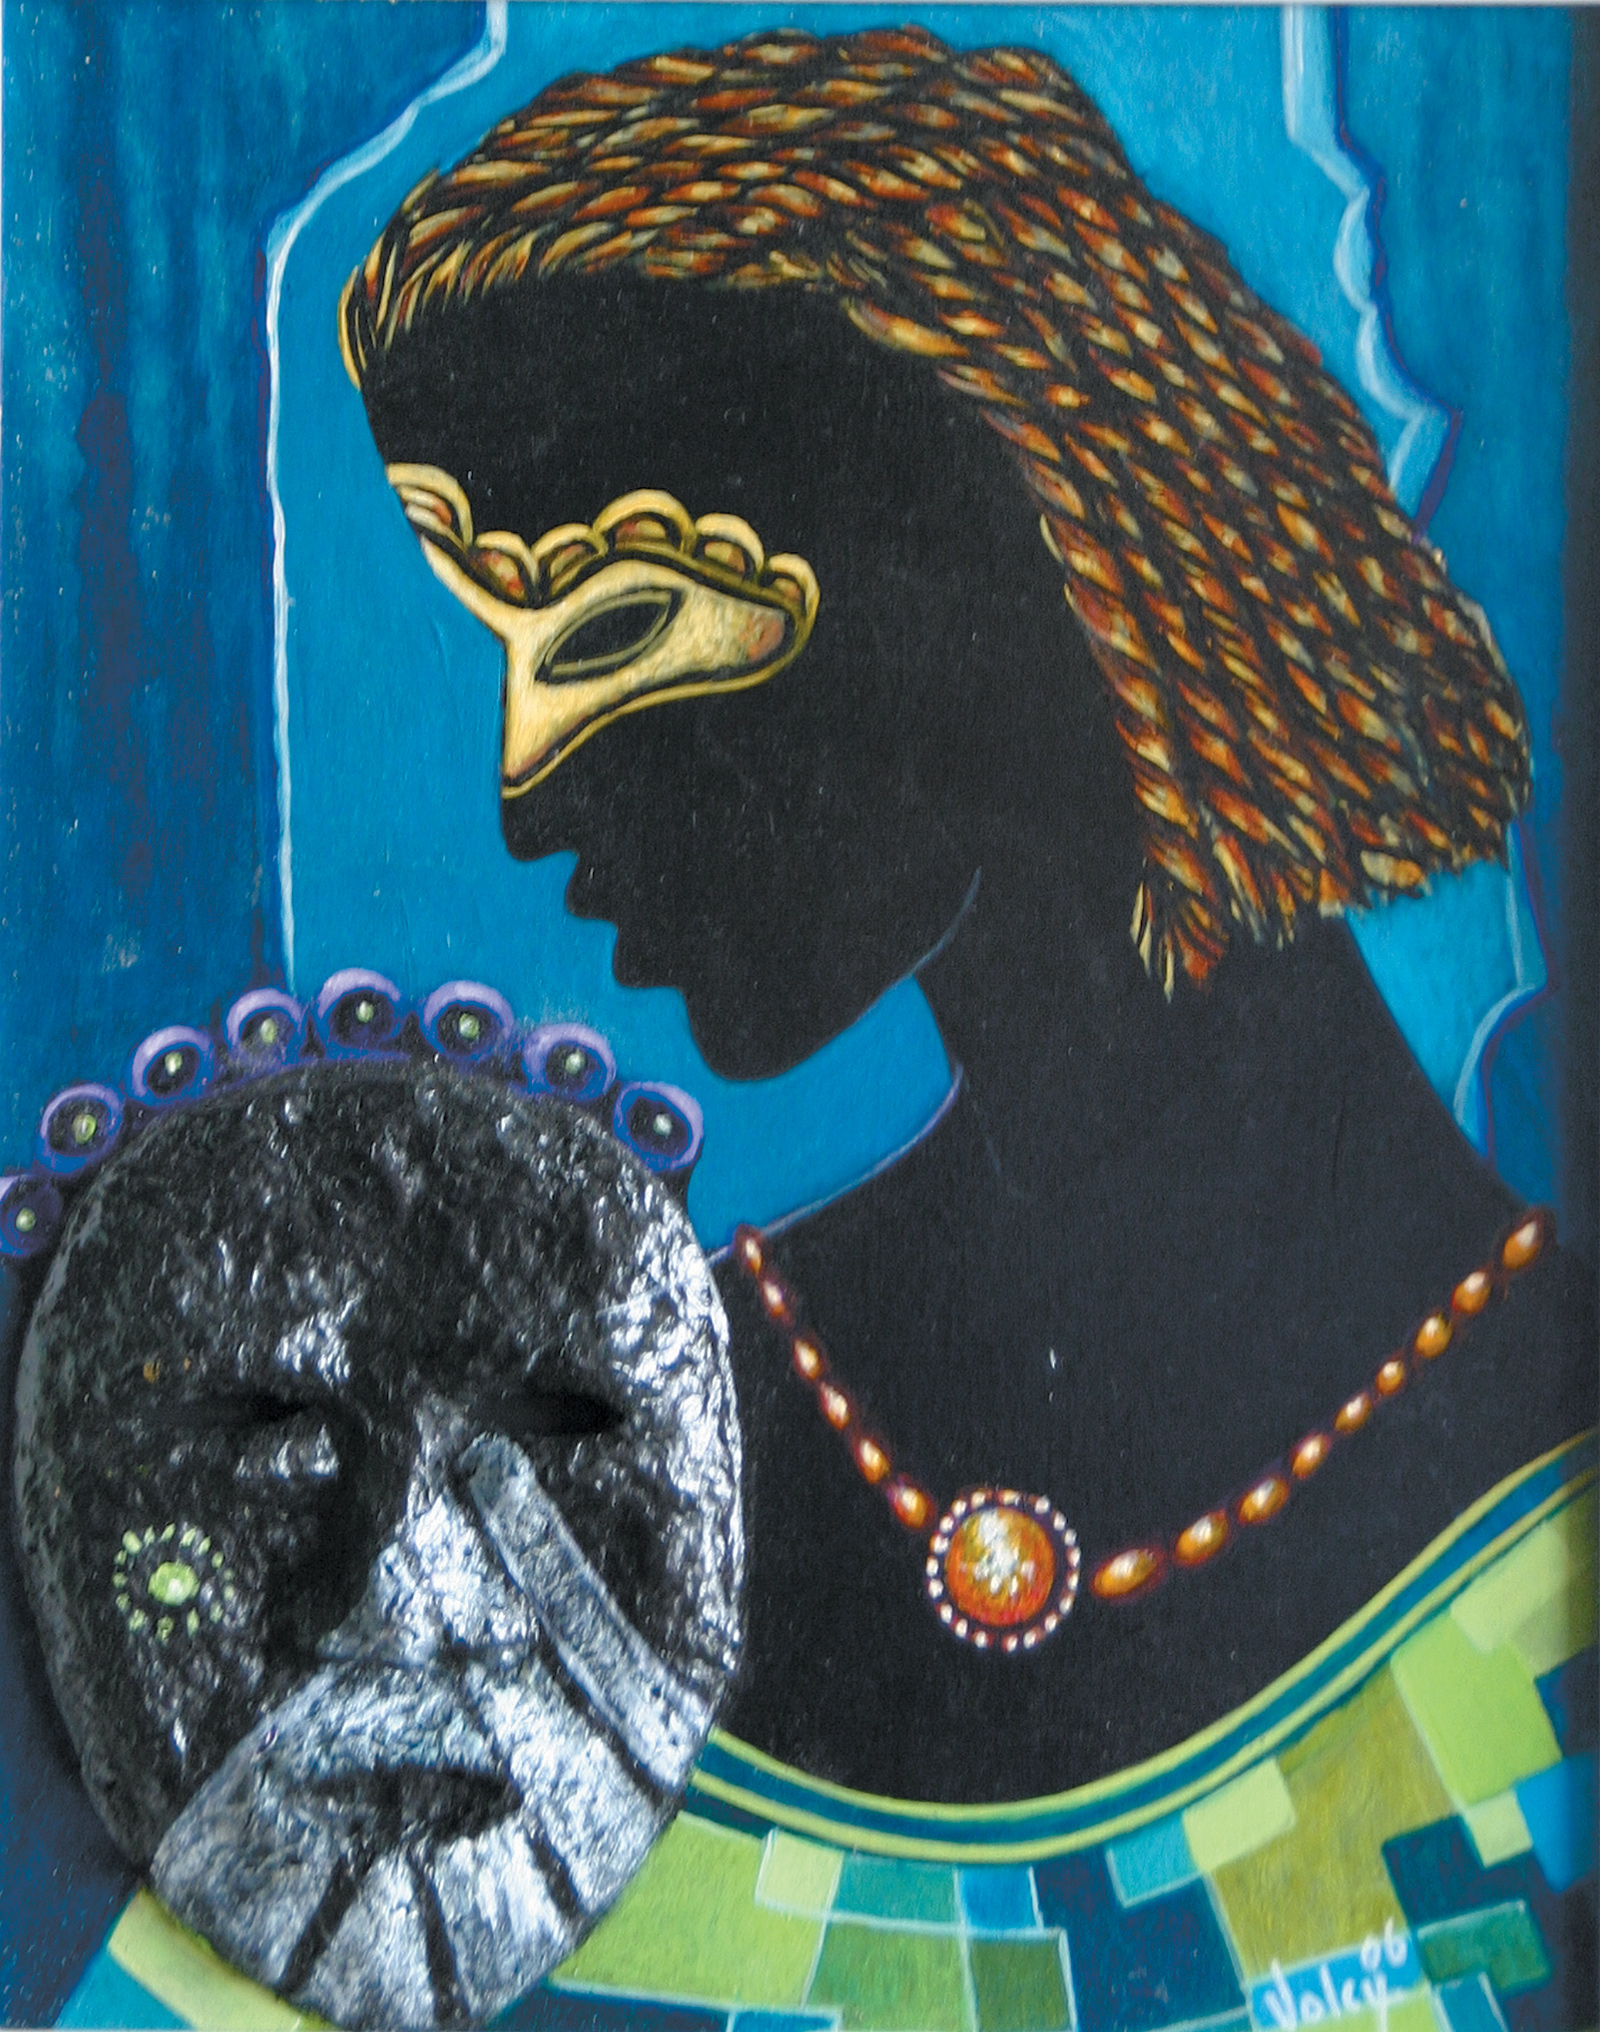 ‘Le masque,’ 2006; painting by Jean Dominique Volcy, a Brooklyn-based Haitian artist, from Save a Museum, a catalog of Haitian artwork donated to raise funds to rebuild the Musée d’Art Haïtien du Collège Saint-Pierre in Port-au-Prince, which was damaged in the 2010 earthquake. It includes an essay by Michel Philippe Lerebours and is published by the Toussaint Louverture Cultural Foundation.